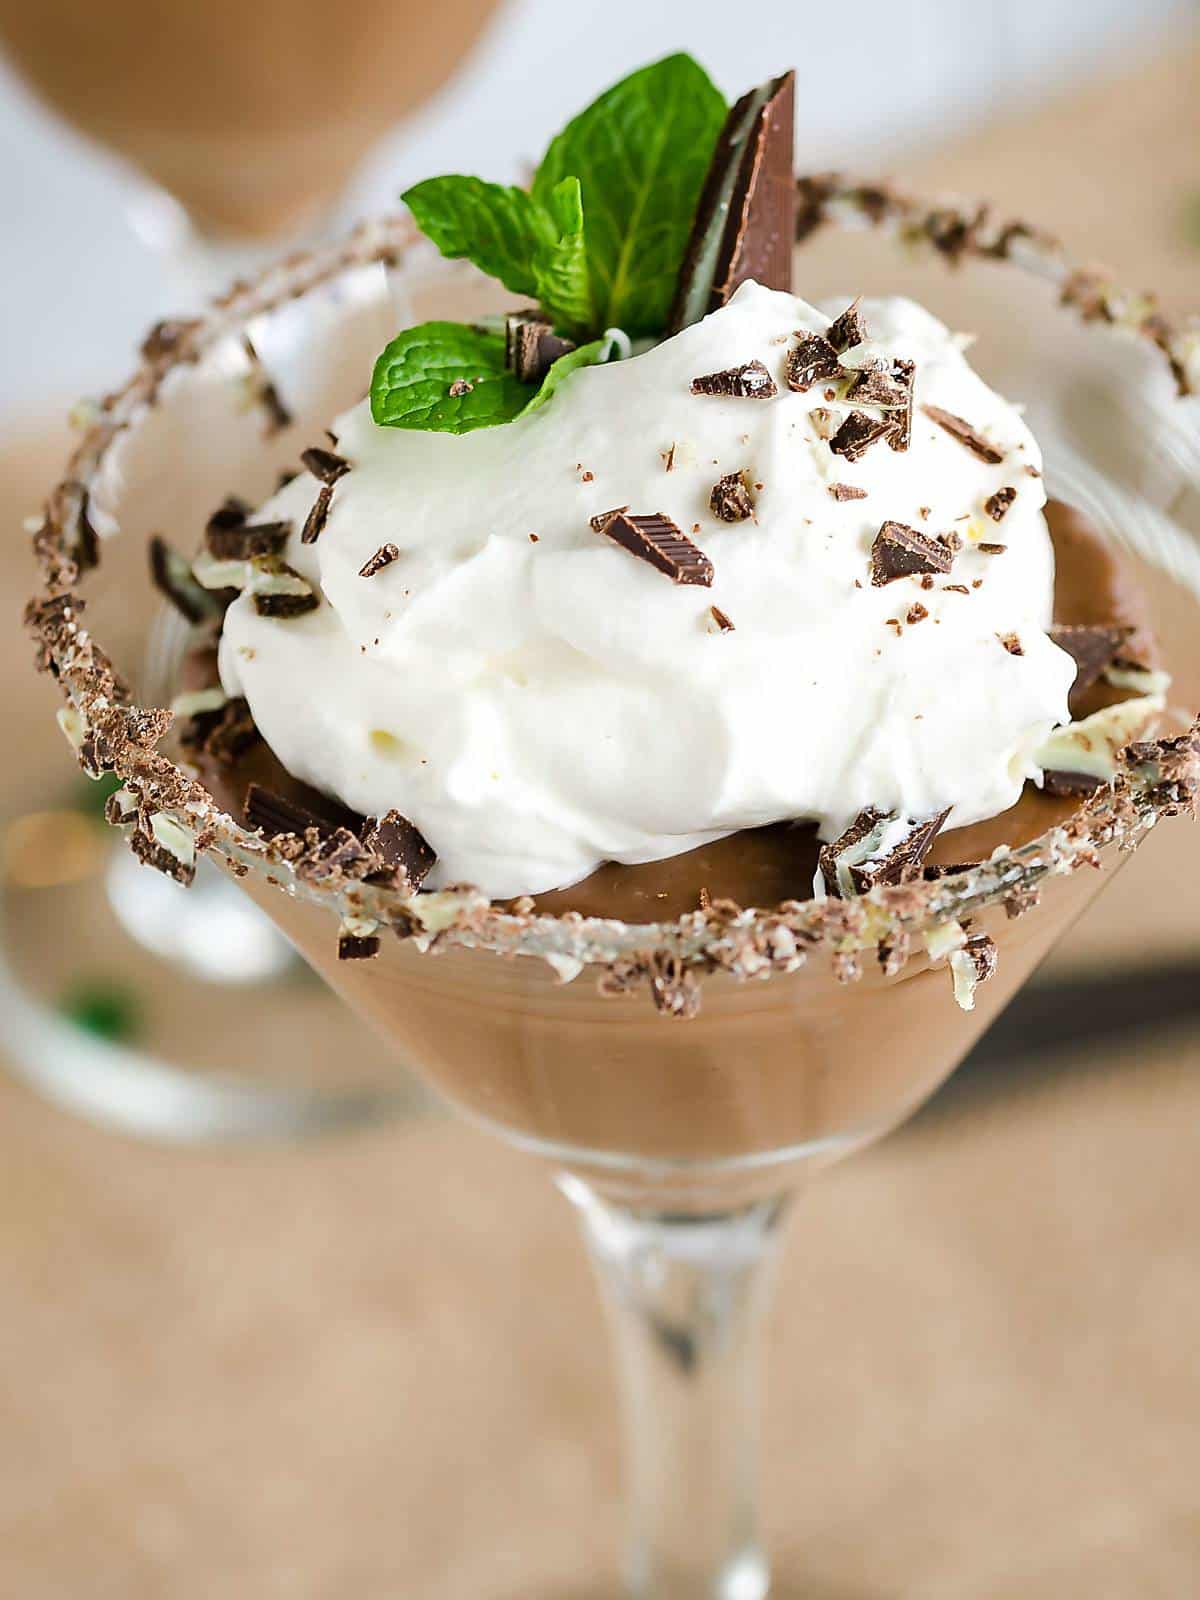 homemade bittersweet chocolate pudding served in a martini glass with whipped cream.